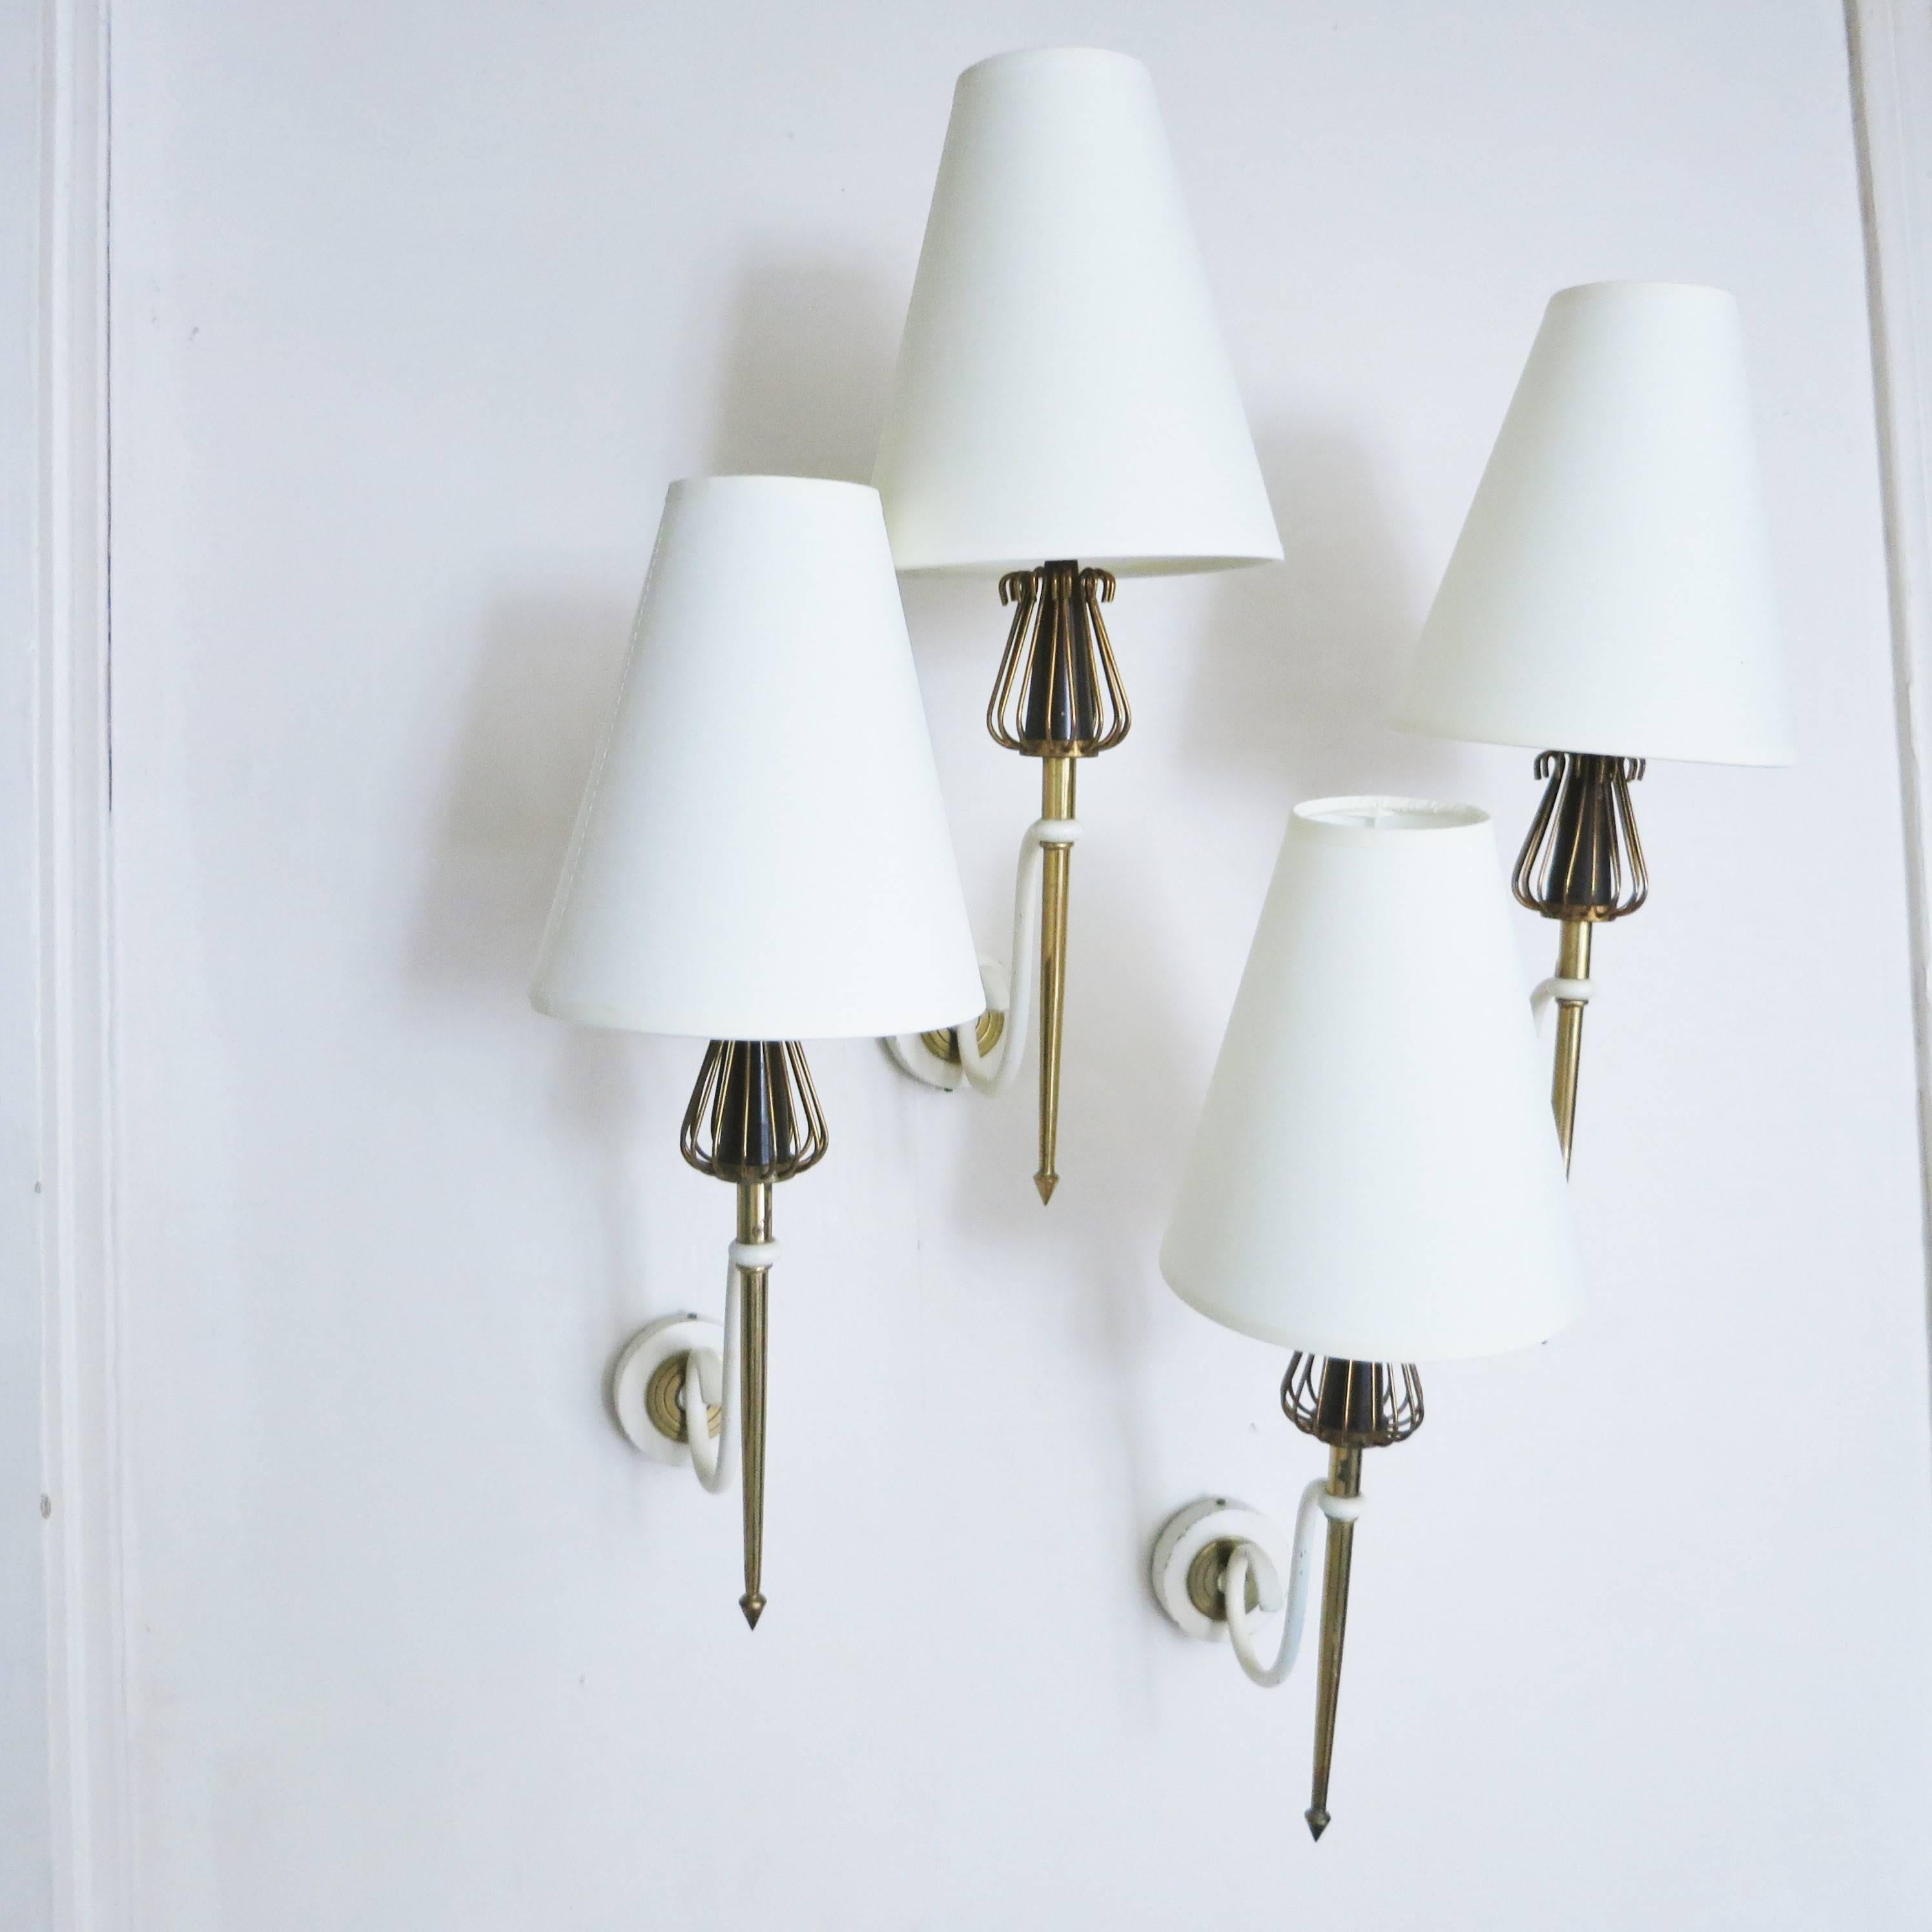 Set of four French Mid-Century Modern sconces by Maison Lunel in brass, brown bakelite, white lacquered metal, and fabric shades,
circa 1950.